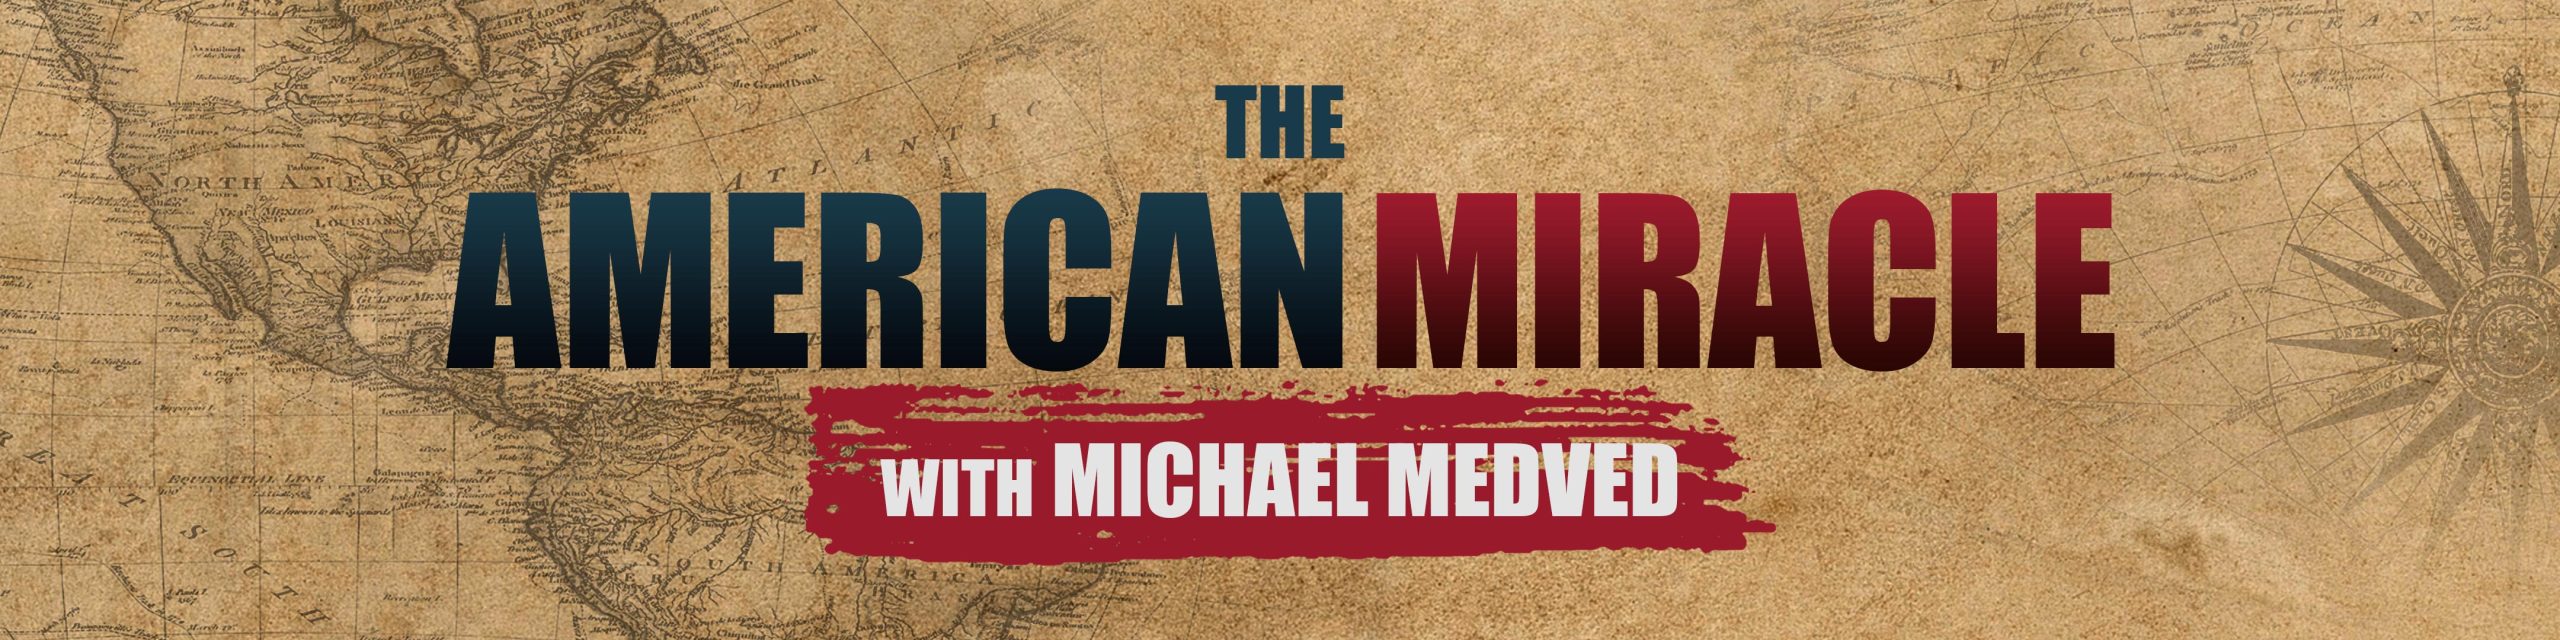 Airwave and Michael Medved Debut “The American Miracle” Podcast